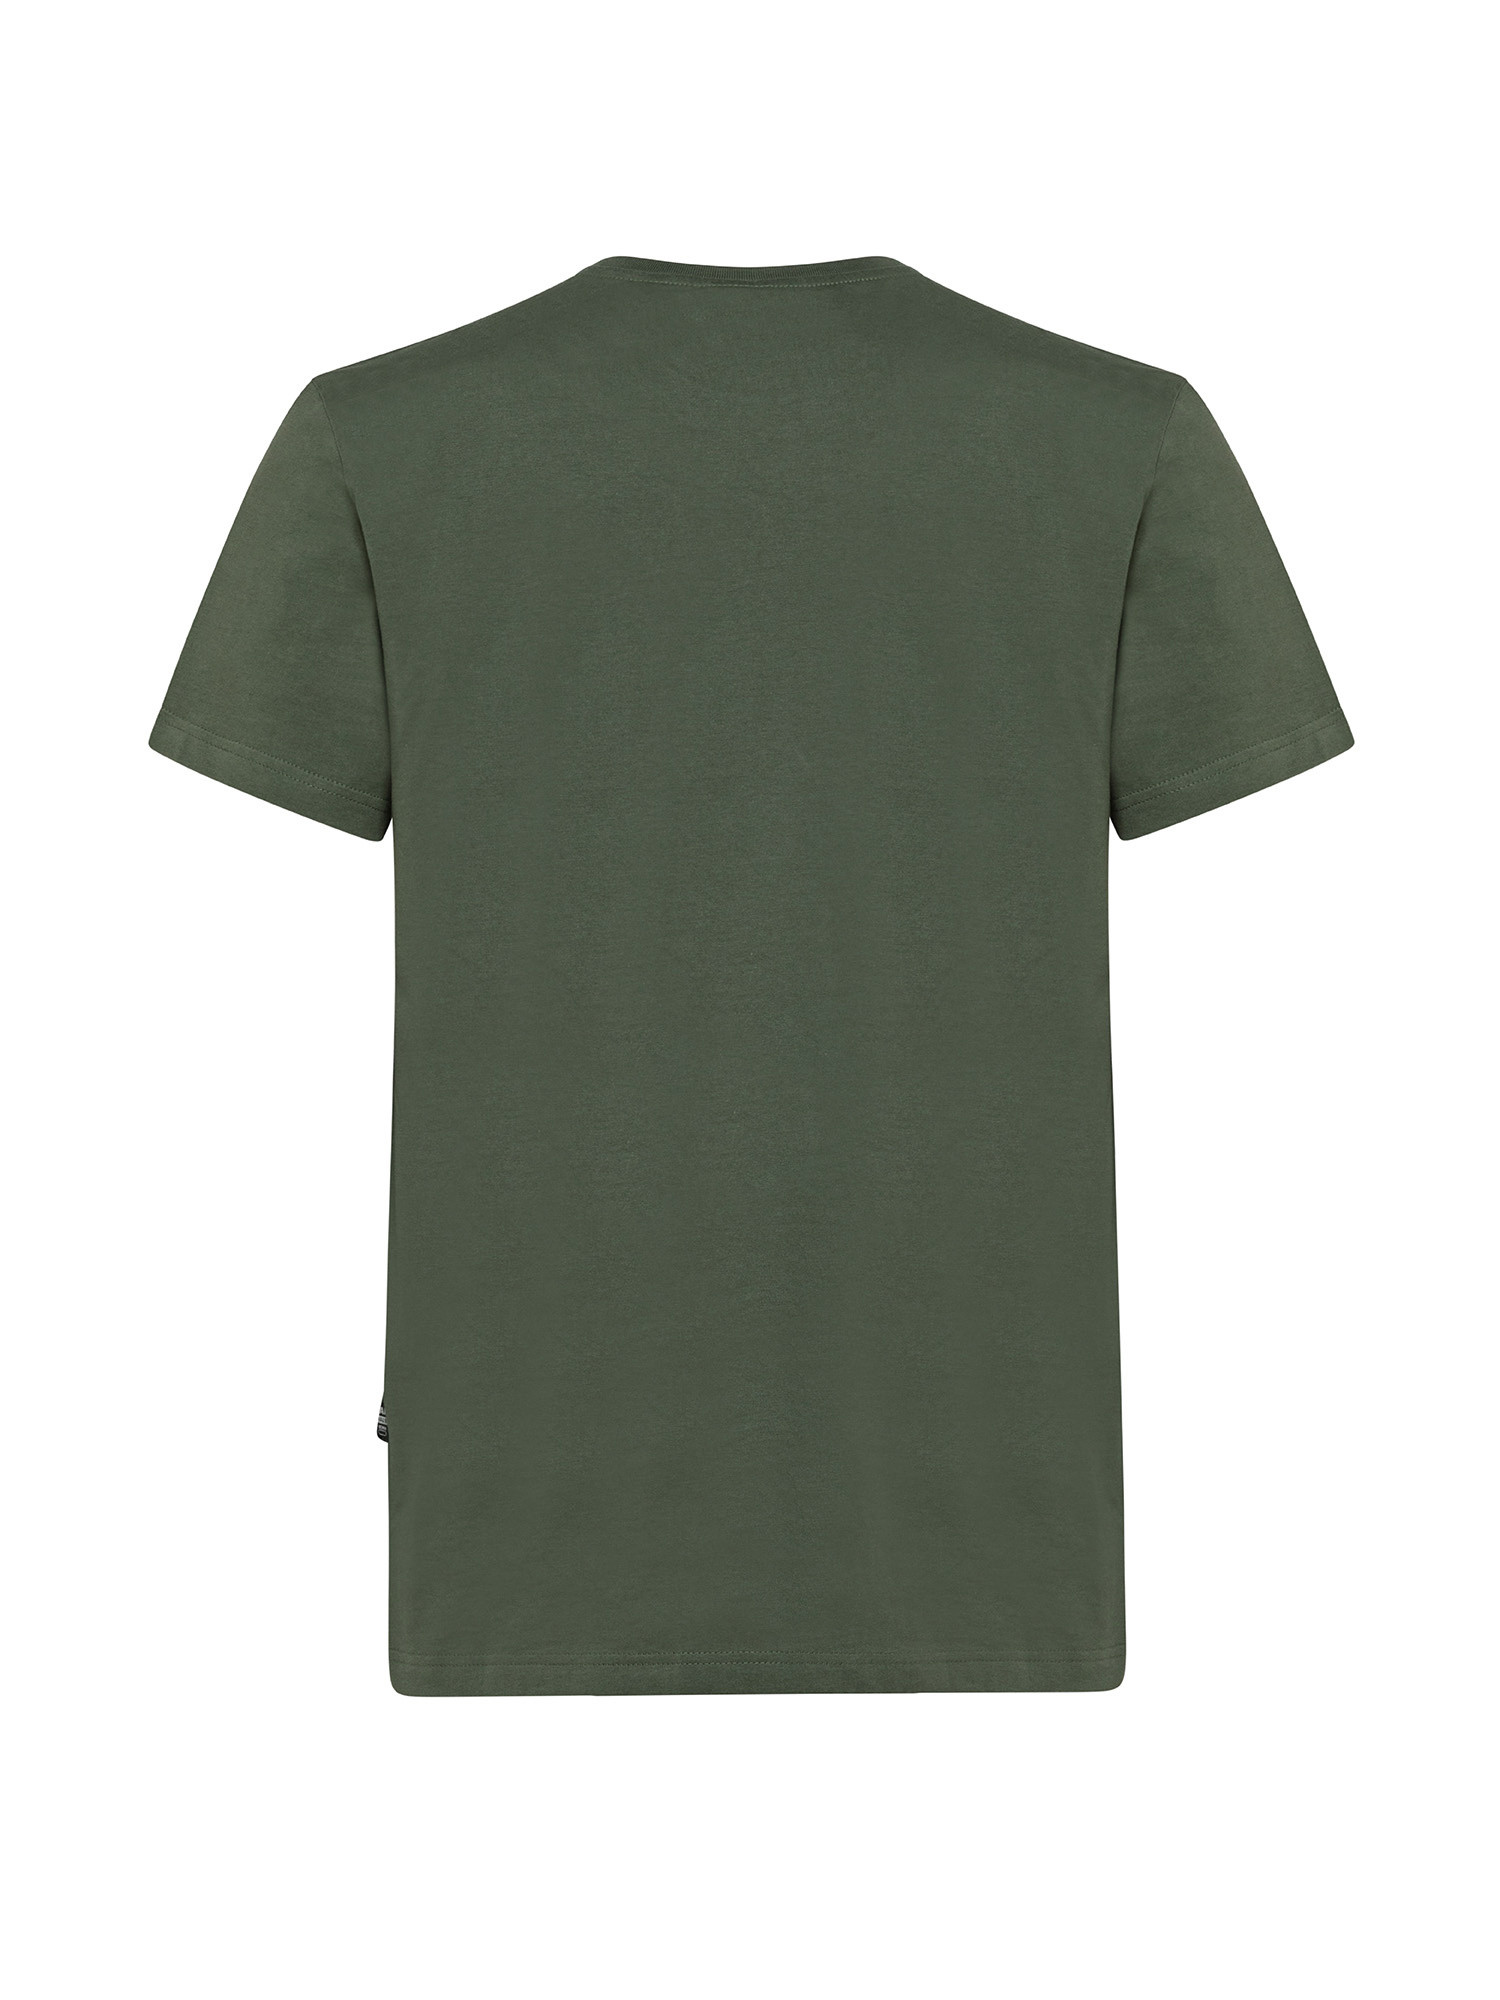 G-Star - T-shirt with print, Olive Green, large image number 1